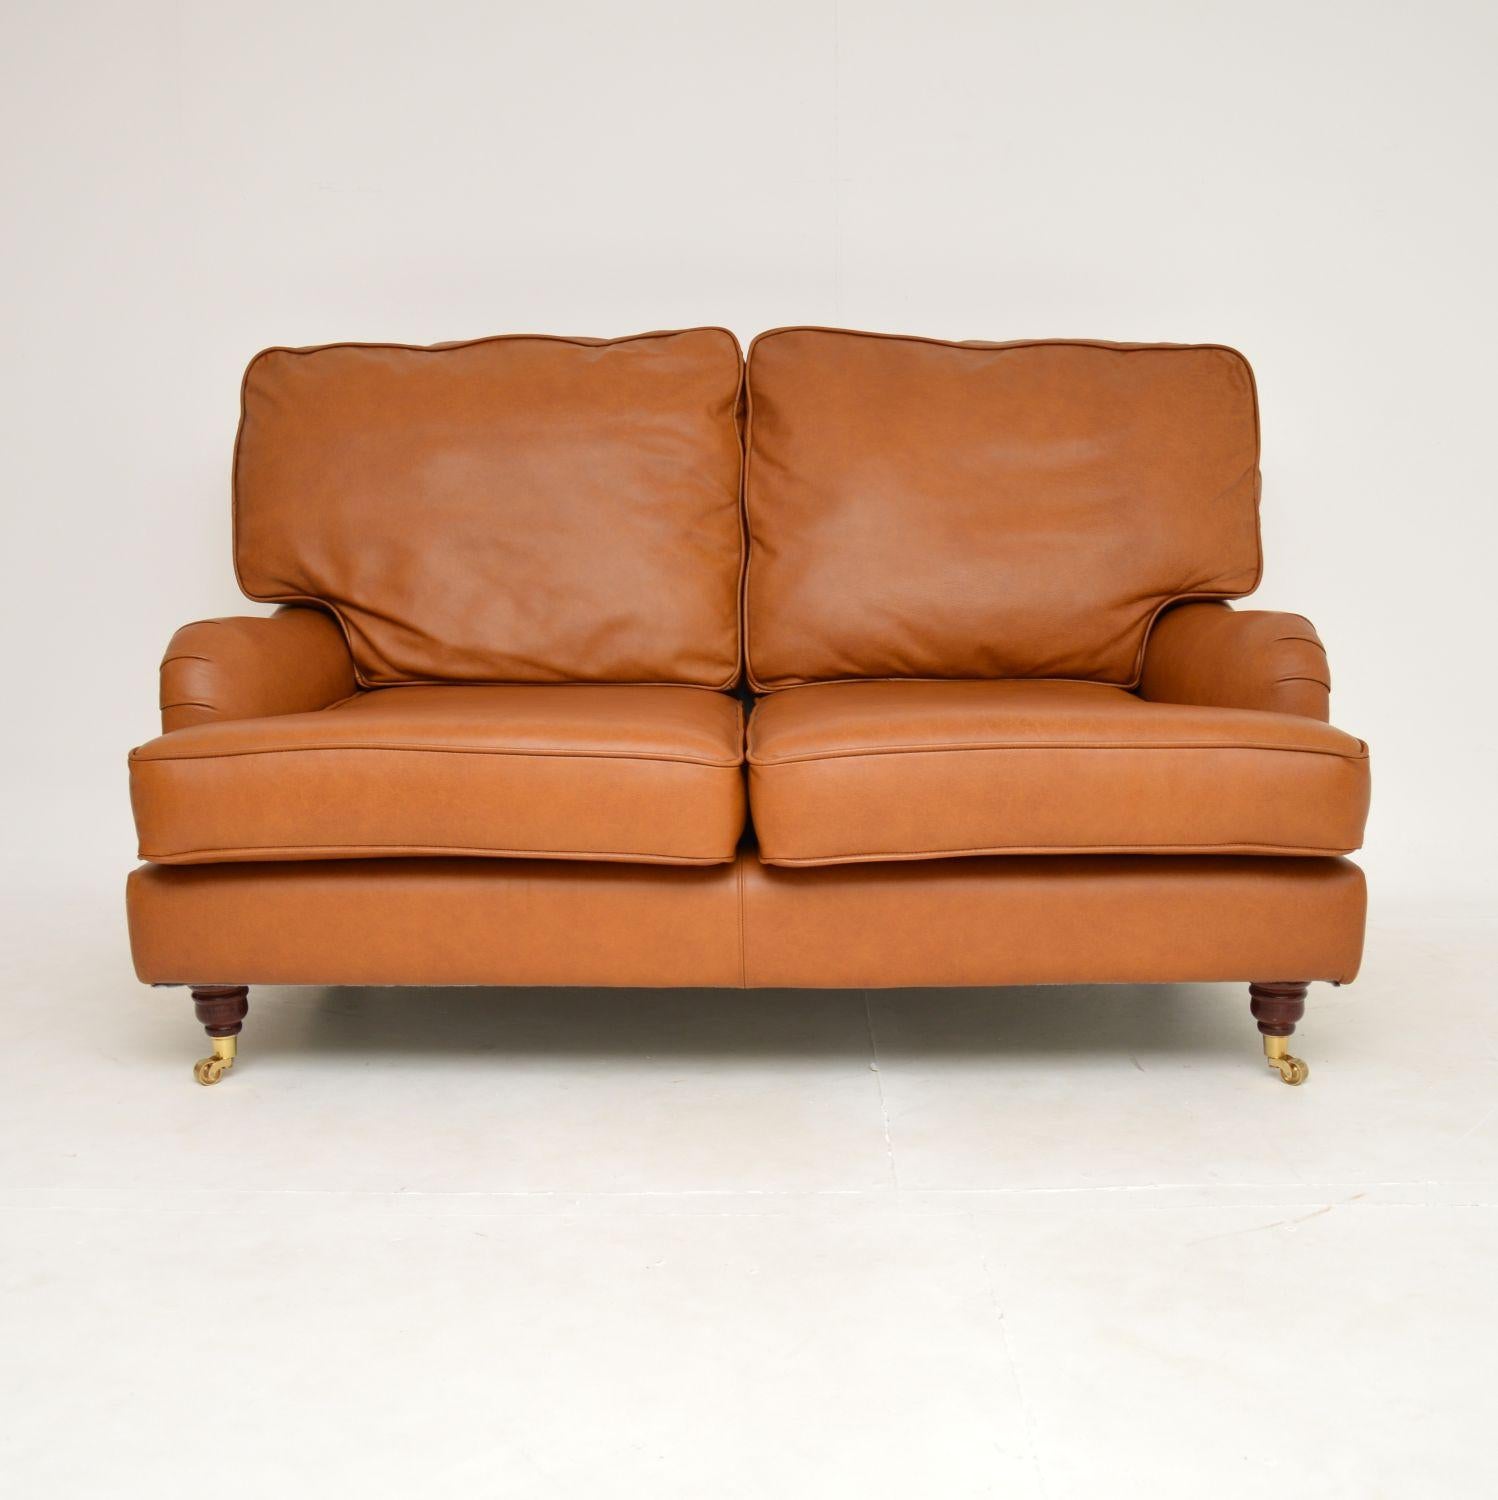 A fantastic leather two seat sofa in the antique Howard style. This was made in England, it dates from the late 20th century.

The quality is excellent and this is extremely comfortable to relax in. It is well padded and supportive, the tanned